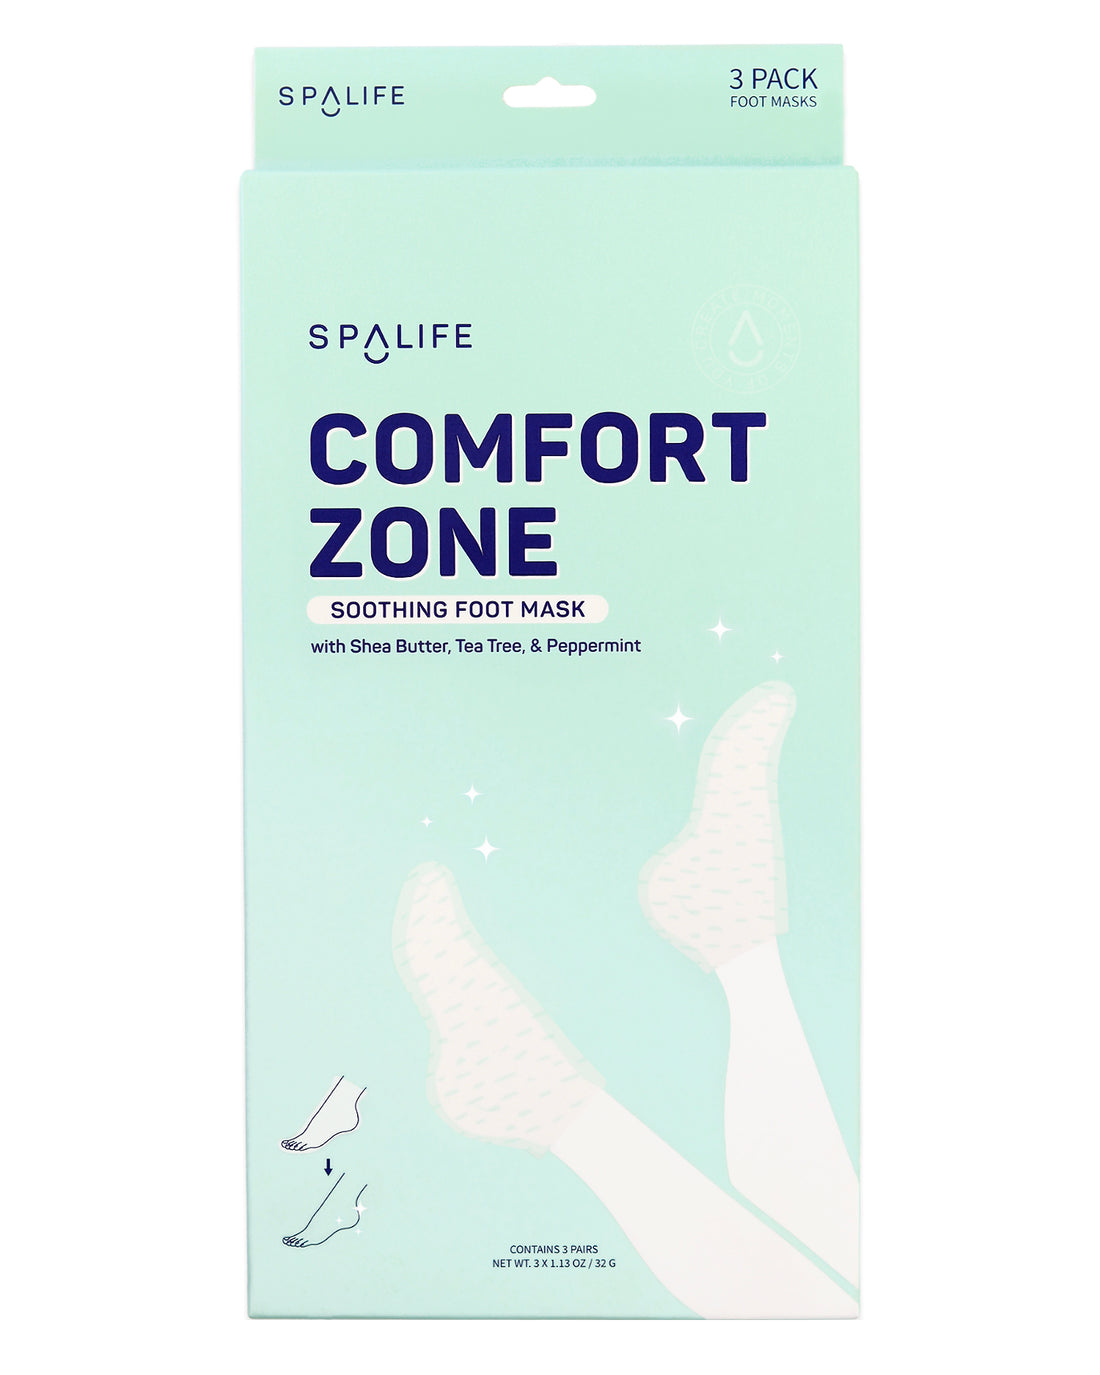 Comfort_zone_soothing_foot_mas-584